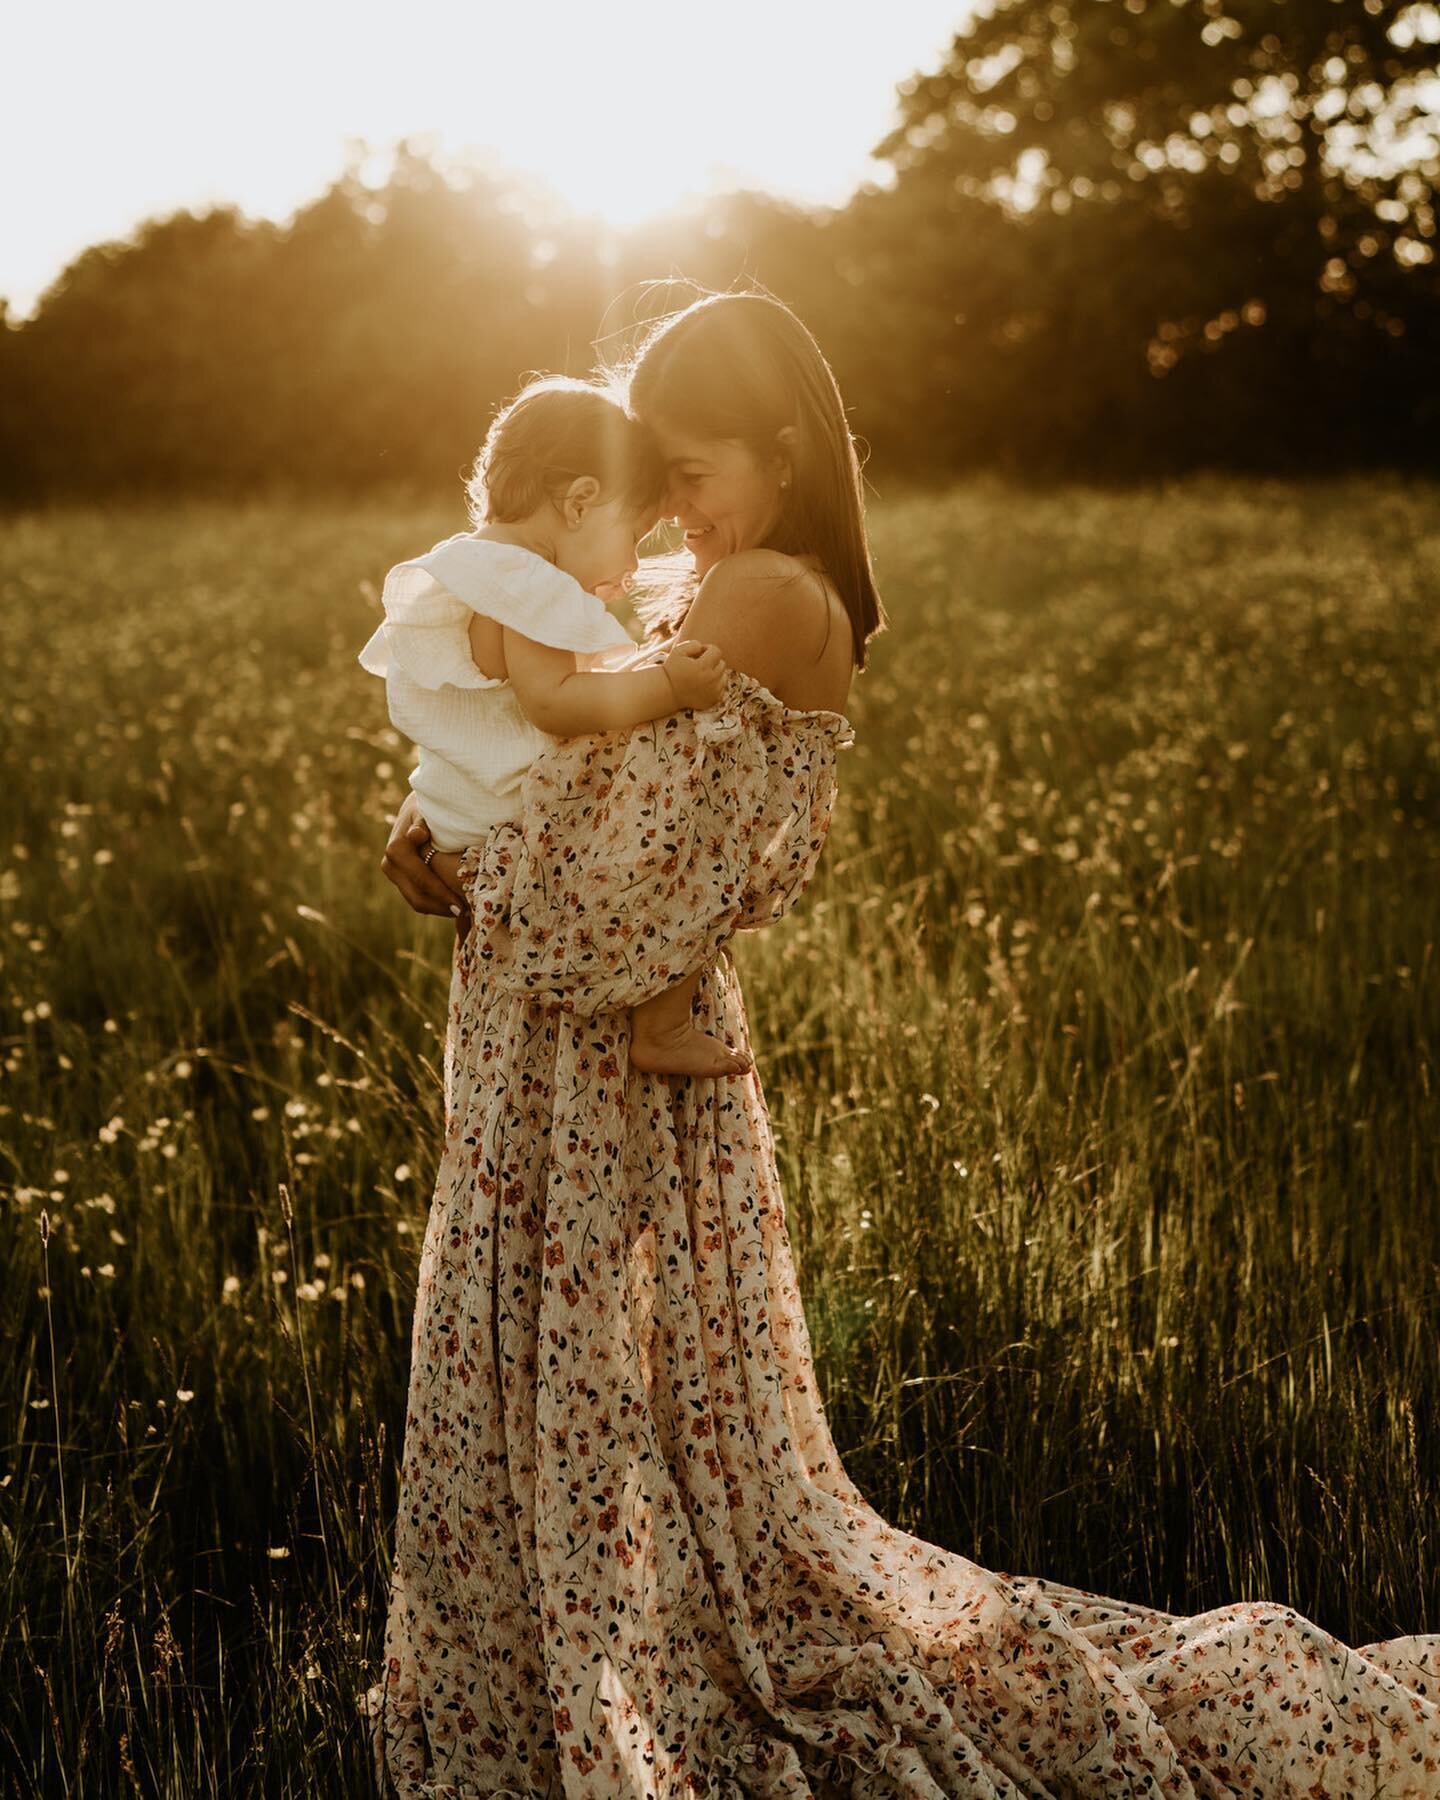 Only two outdoor sessions available before we officially close the outdoor season. 

Forever in love this beautiful sunset session❤️

#outdoorphotography #outfoorfamilyphotoshoot #mumandbaby #motherhood #motherhoodunplugged #mumtobe #capturingmotherh